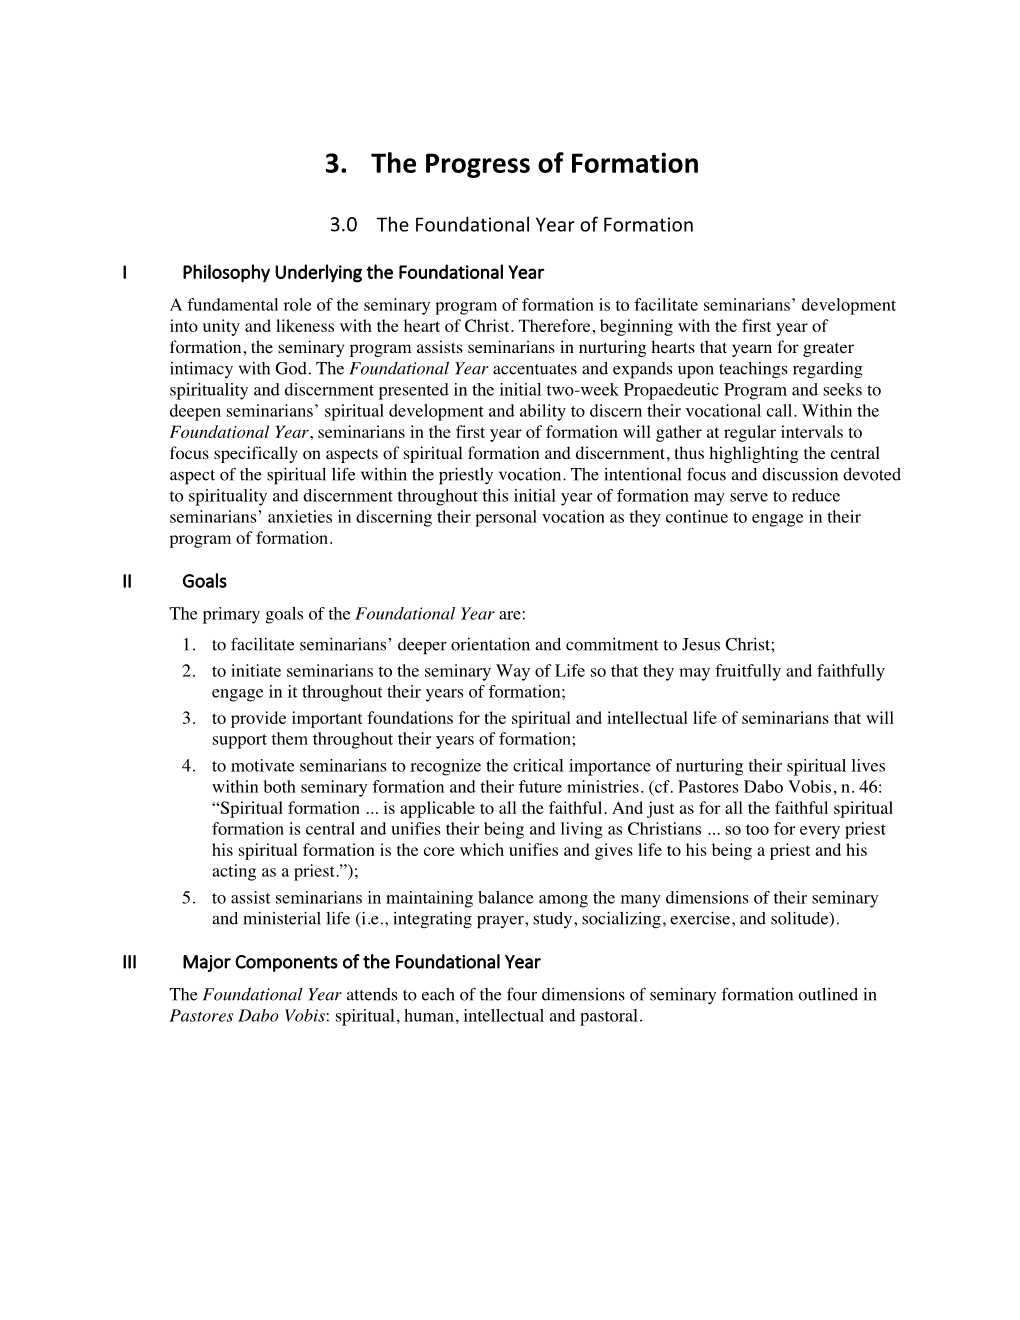 3. the Progress of Formation